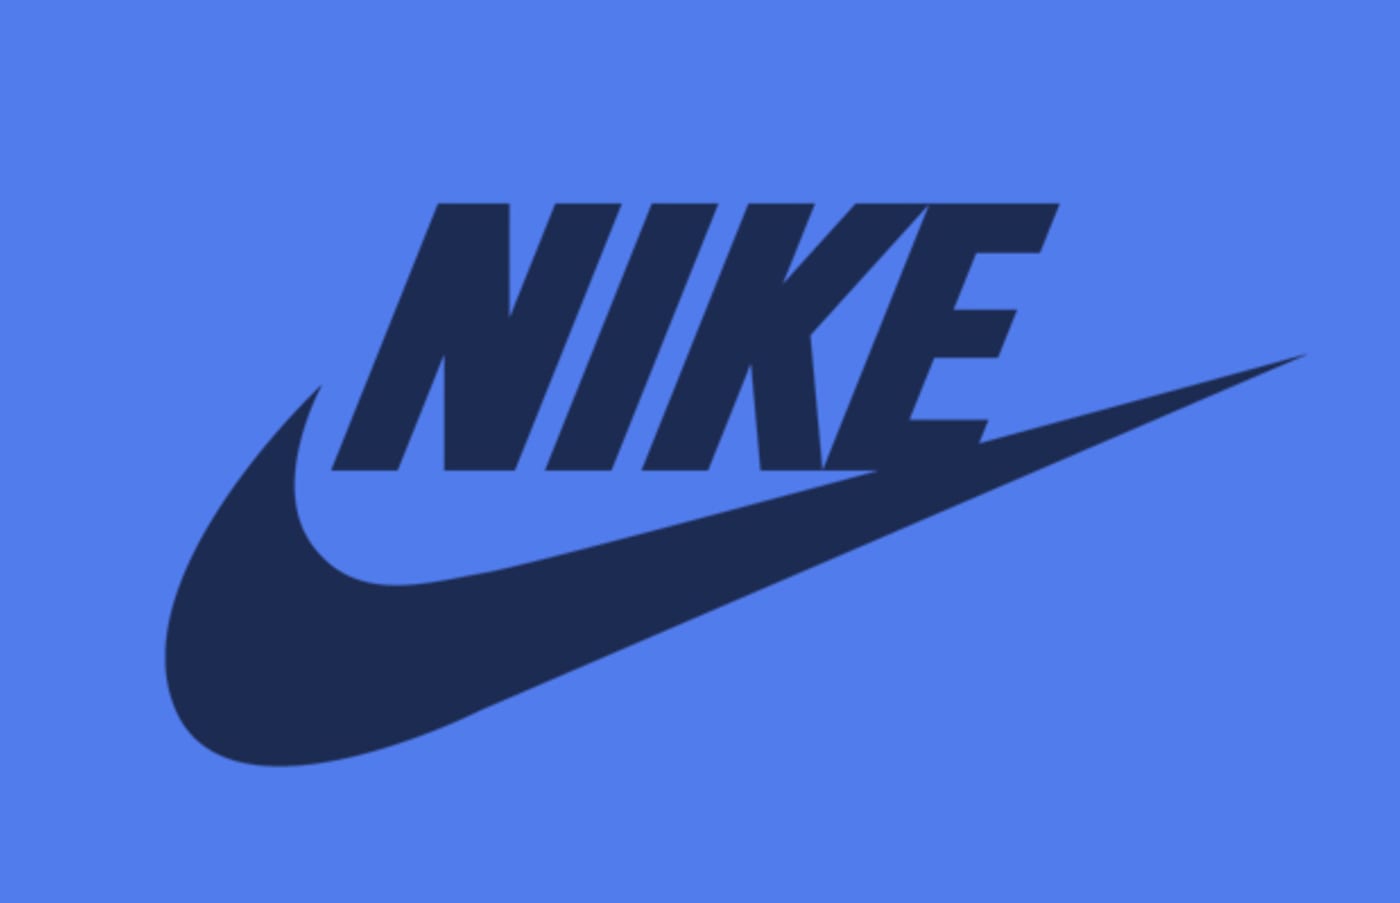 nike founded